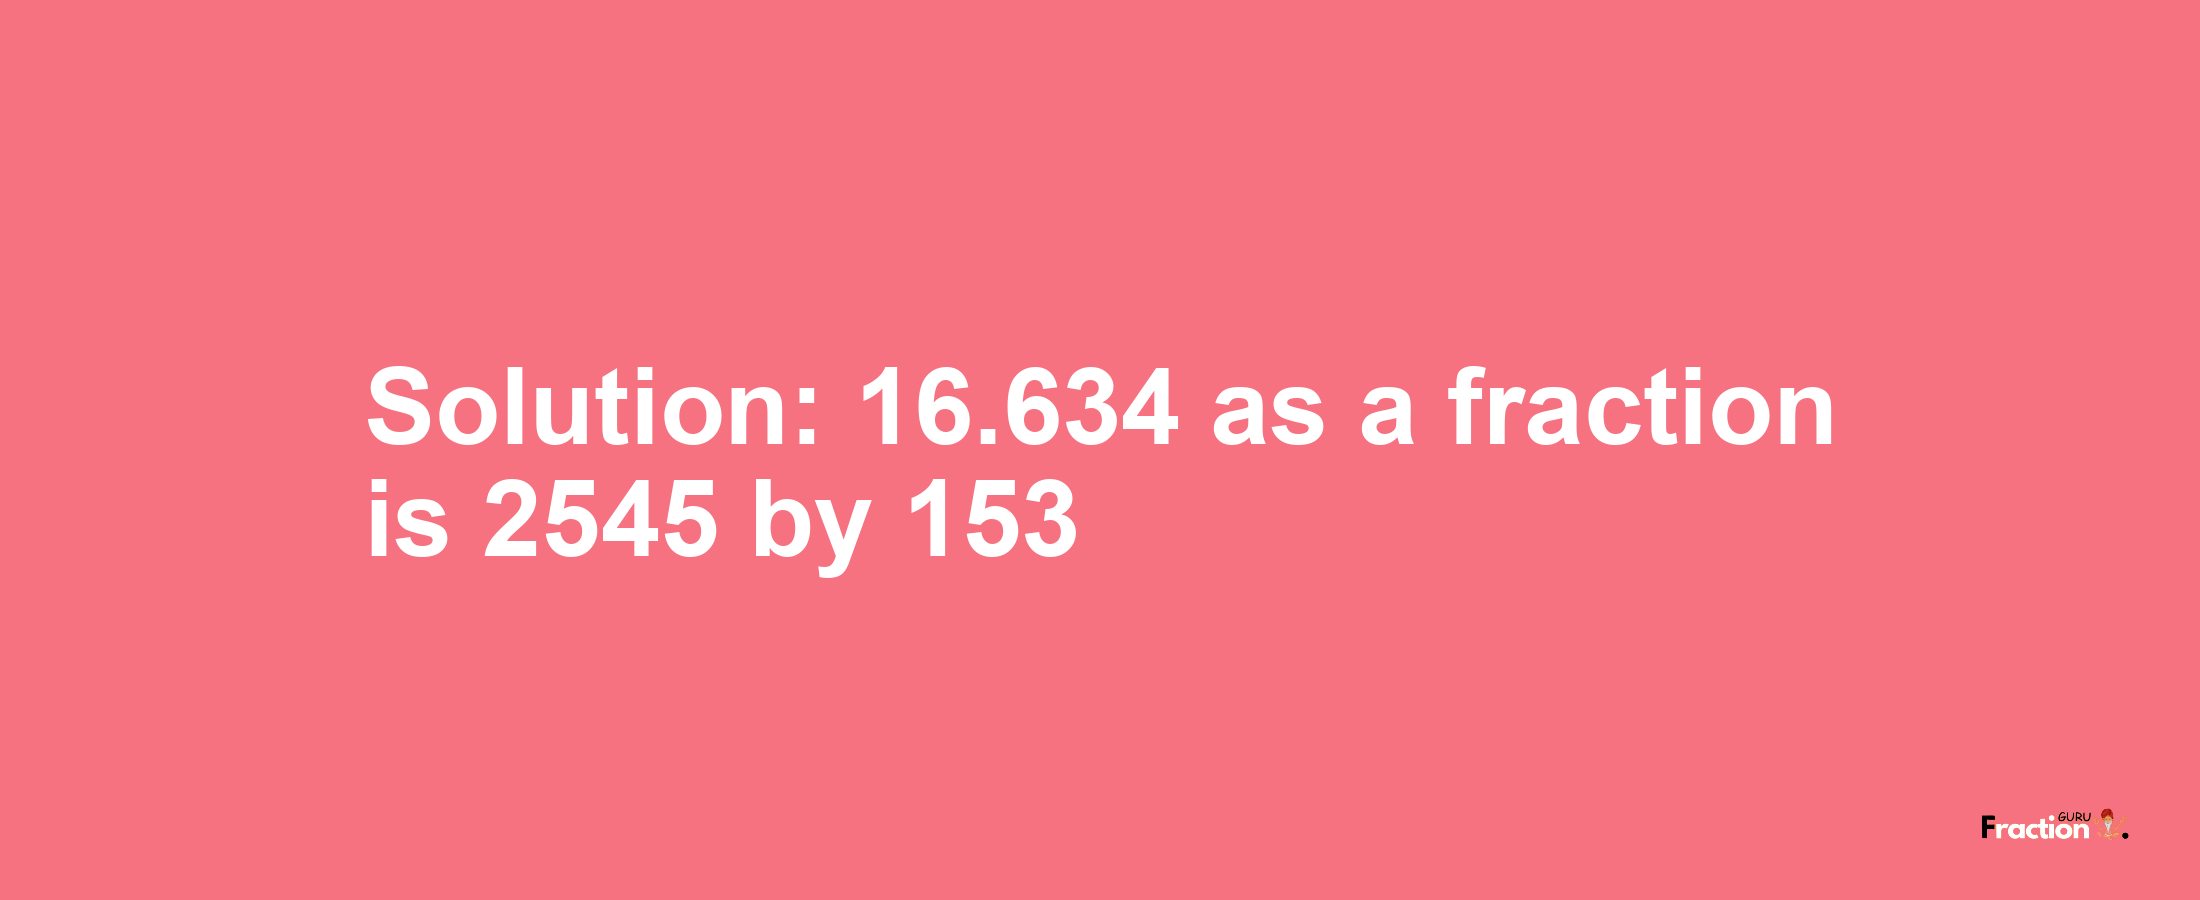 Solution:16.634 as a fraction is 2545/153